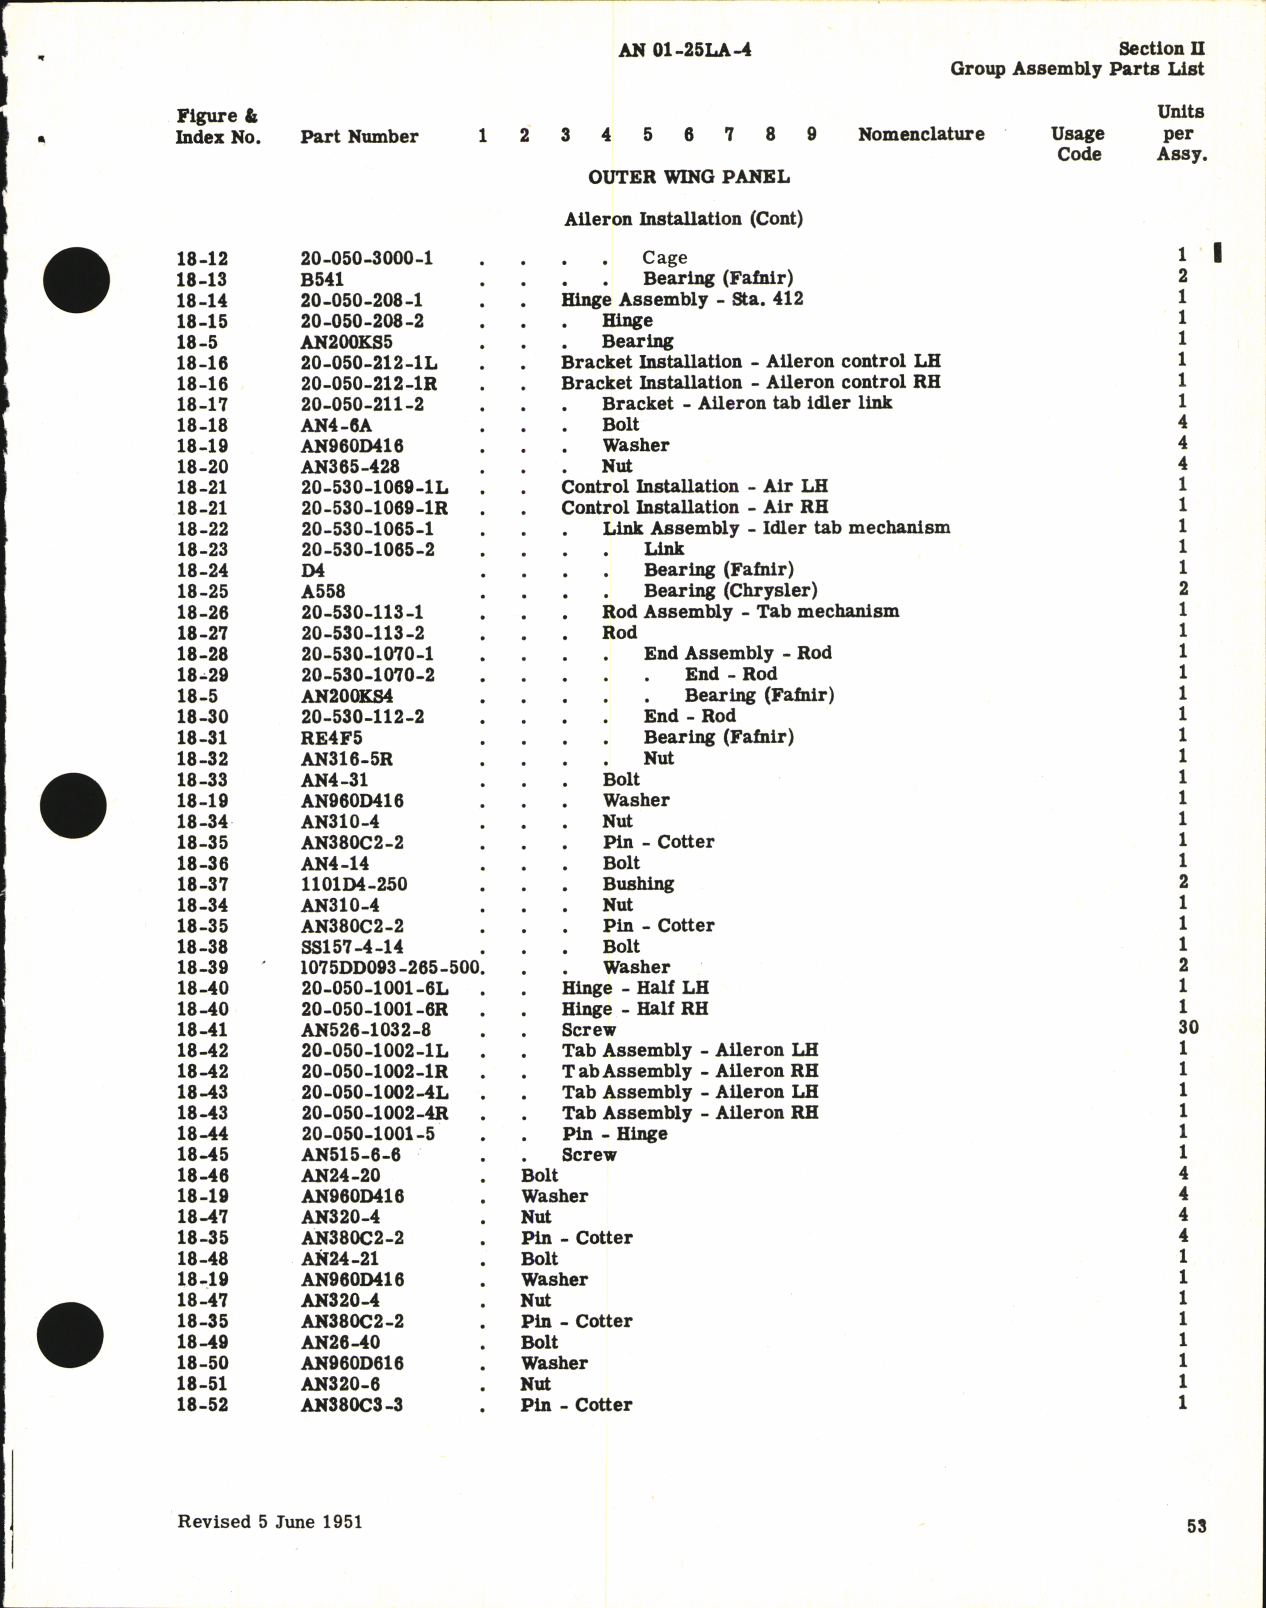 Sample page 7 from AirCorps Library document: Parts Catalog for C-46A, C-46D, and R5C-1